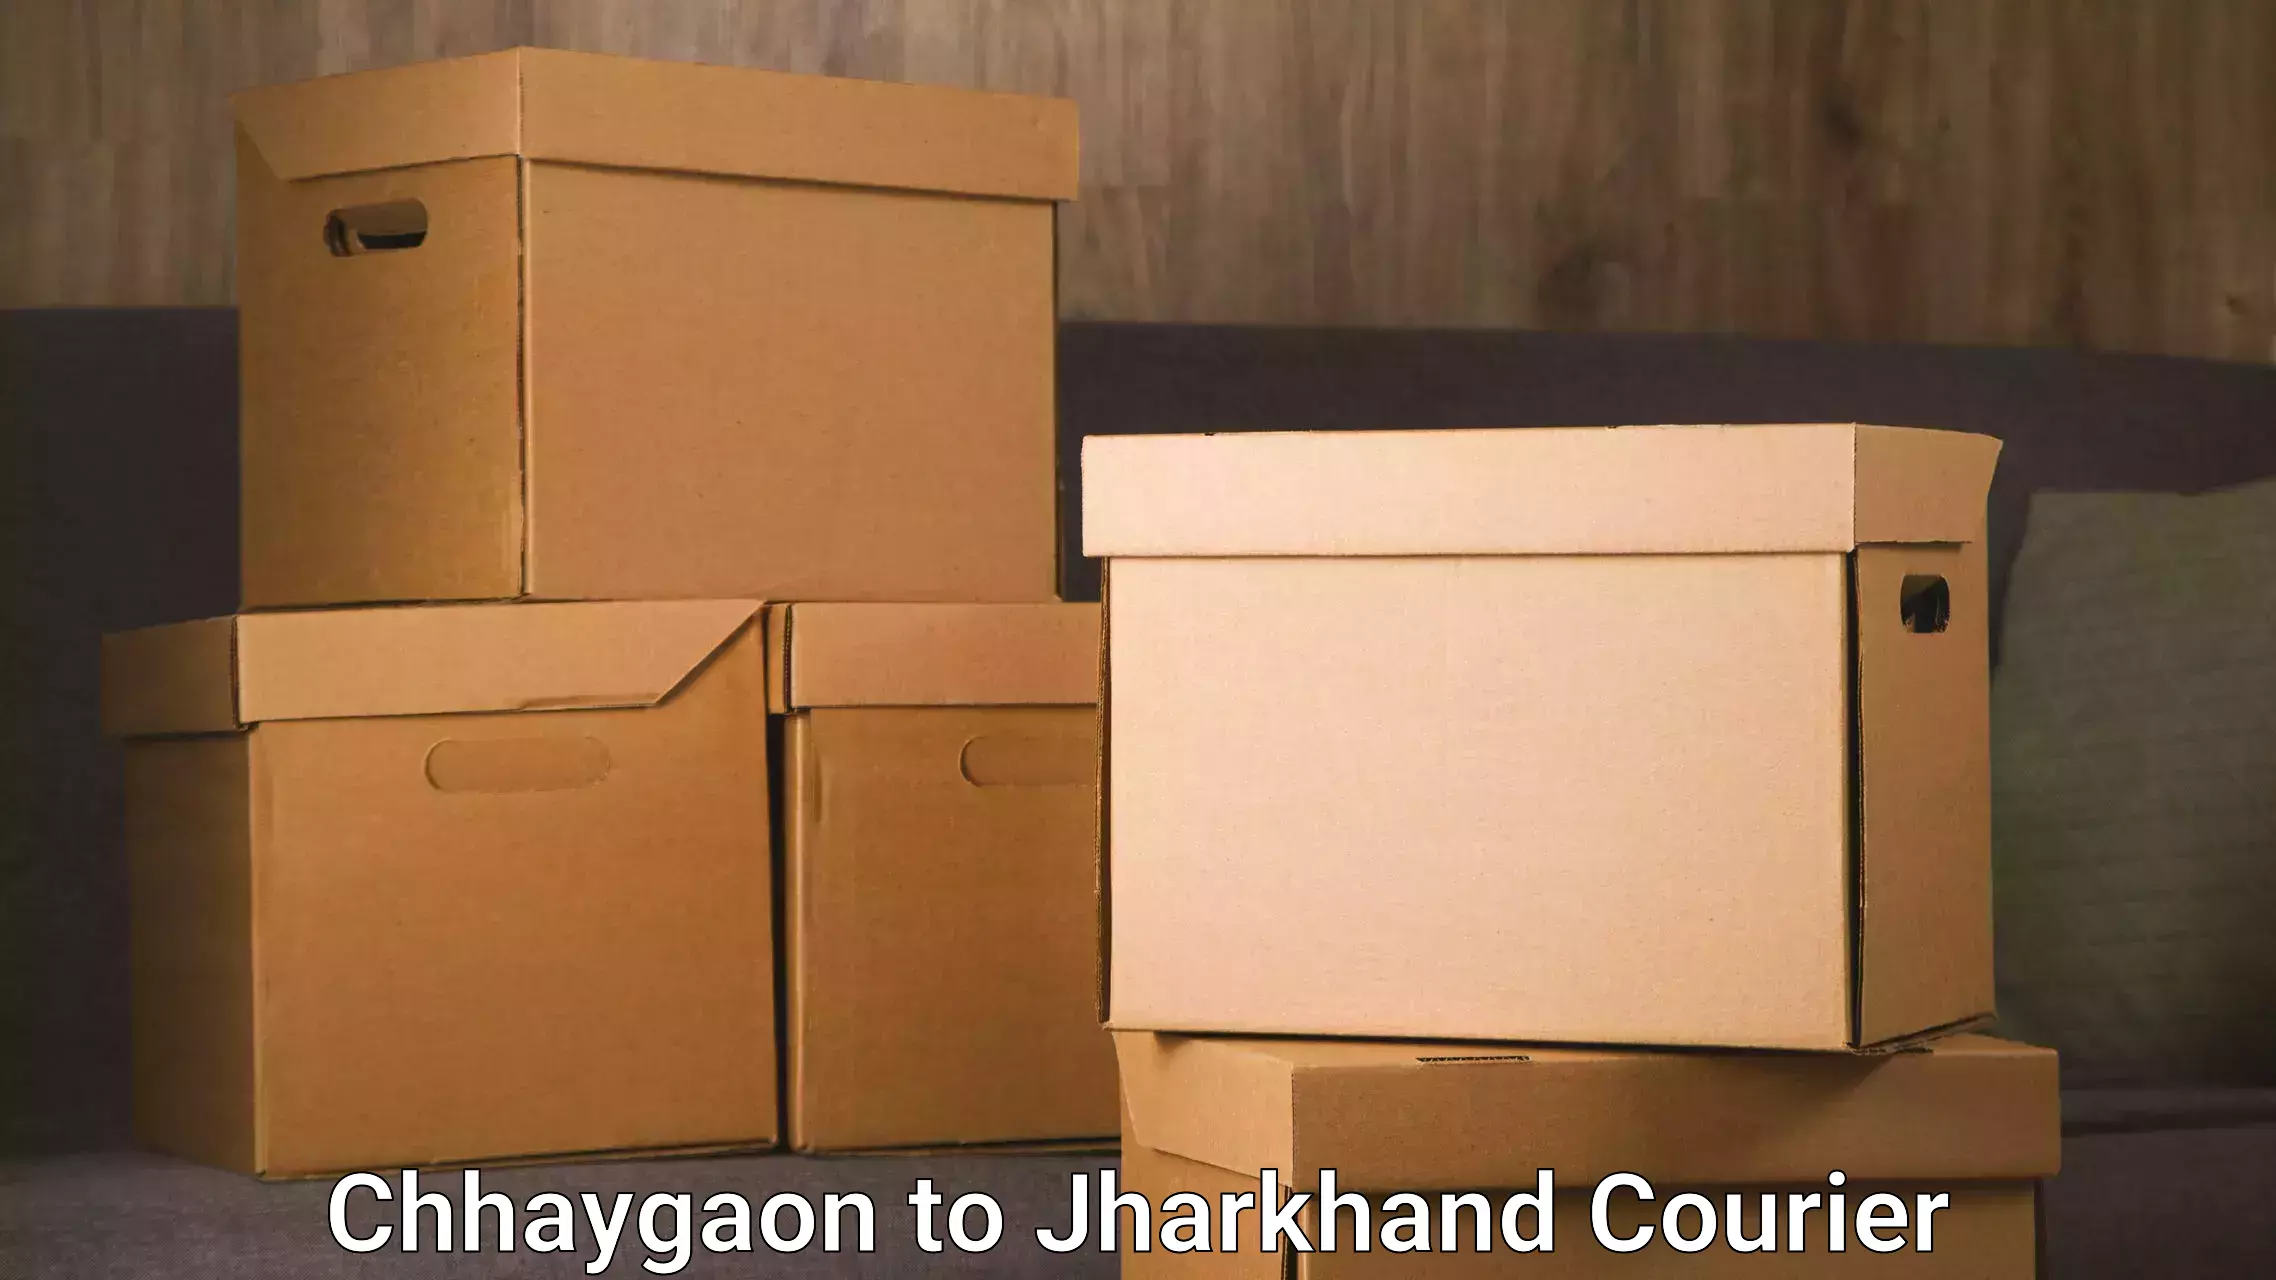 24/7 courier service Chhaygaon to Ramgarh